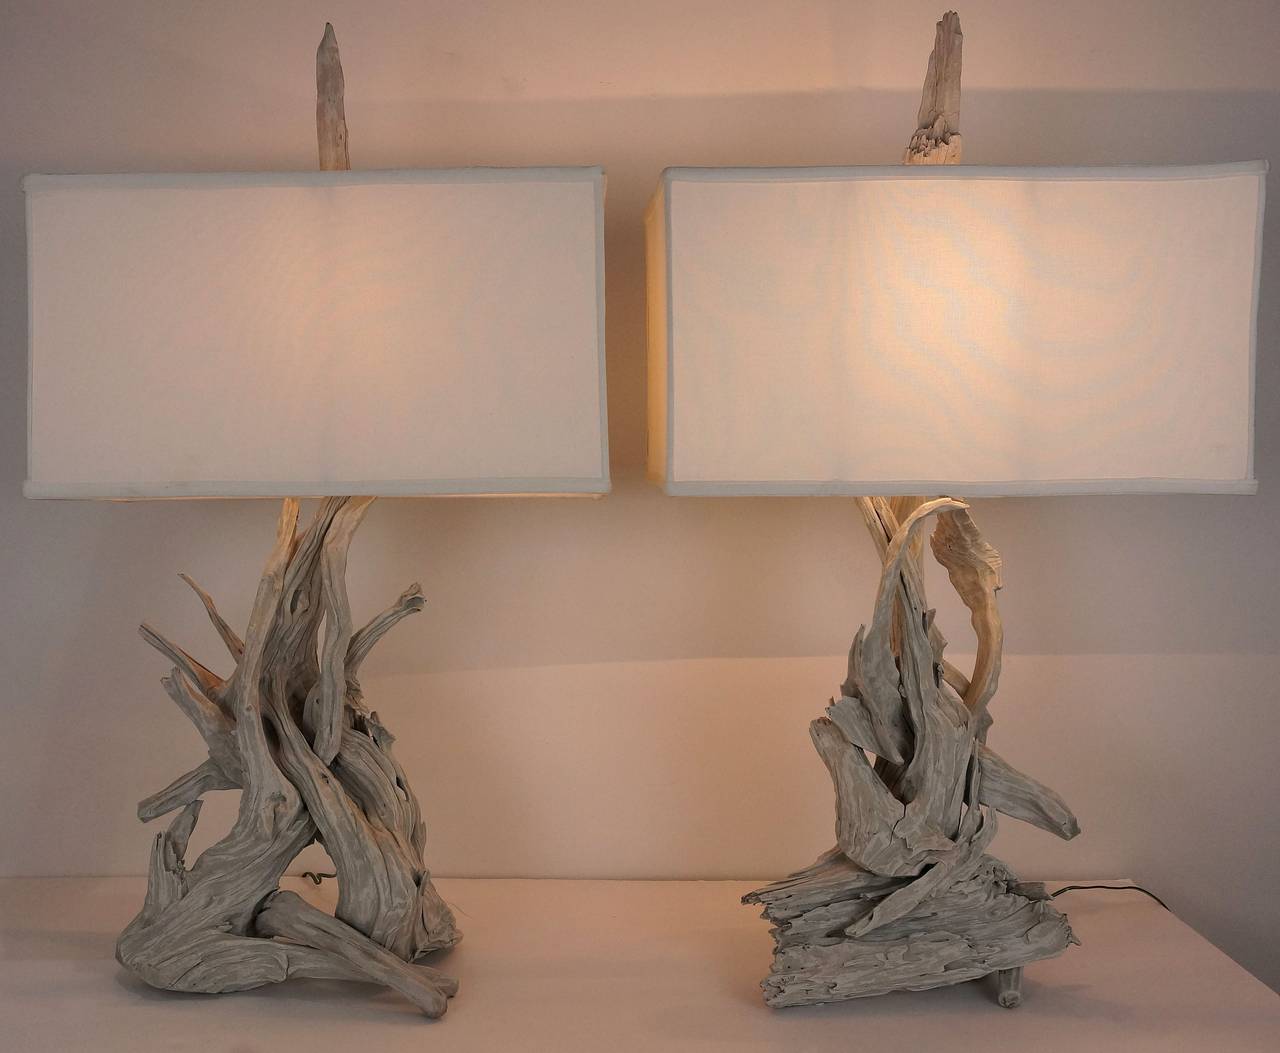 Pair of White-Washed Driftwood Table Lamps, American, 1950s-1960s 2